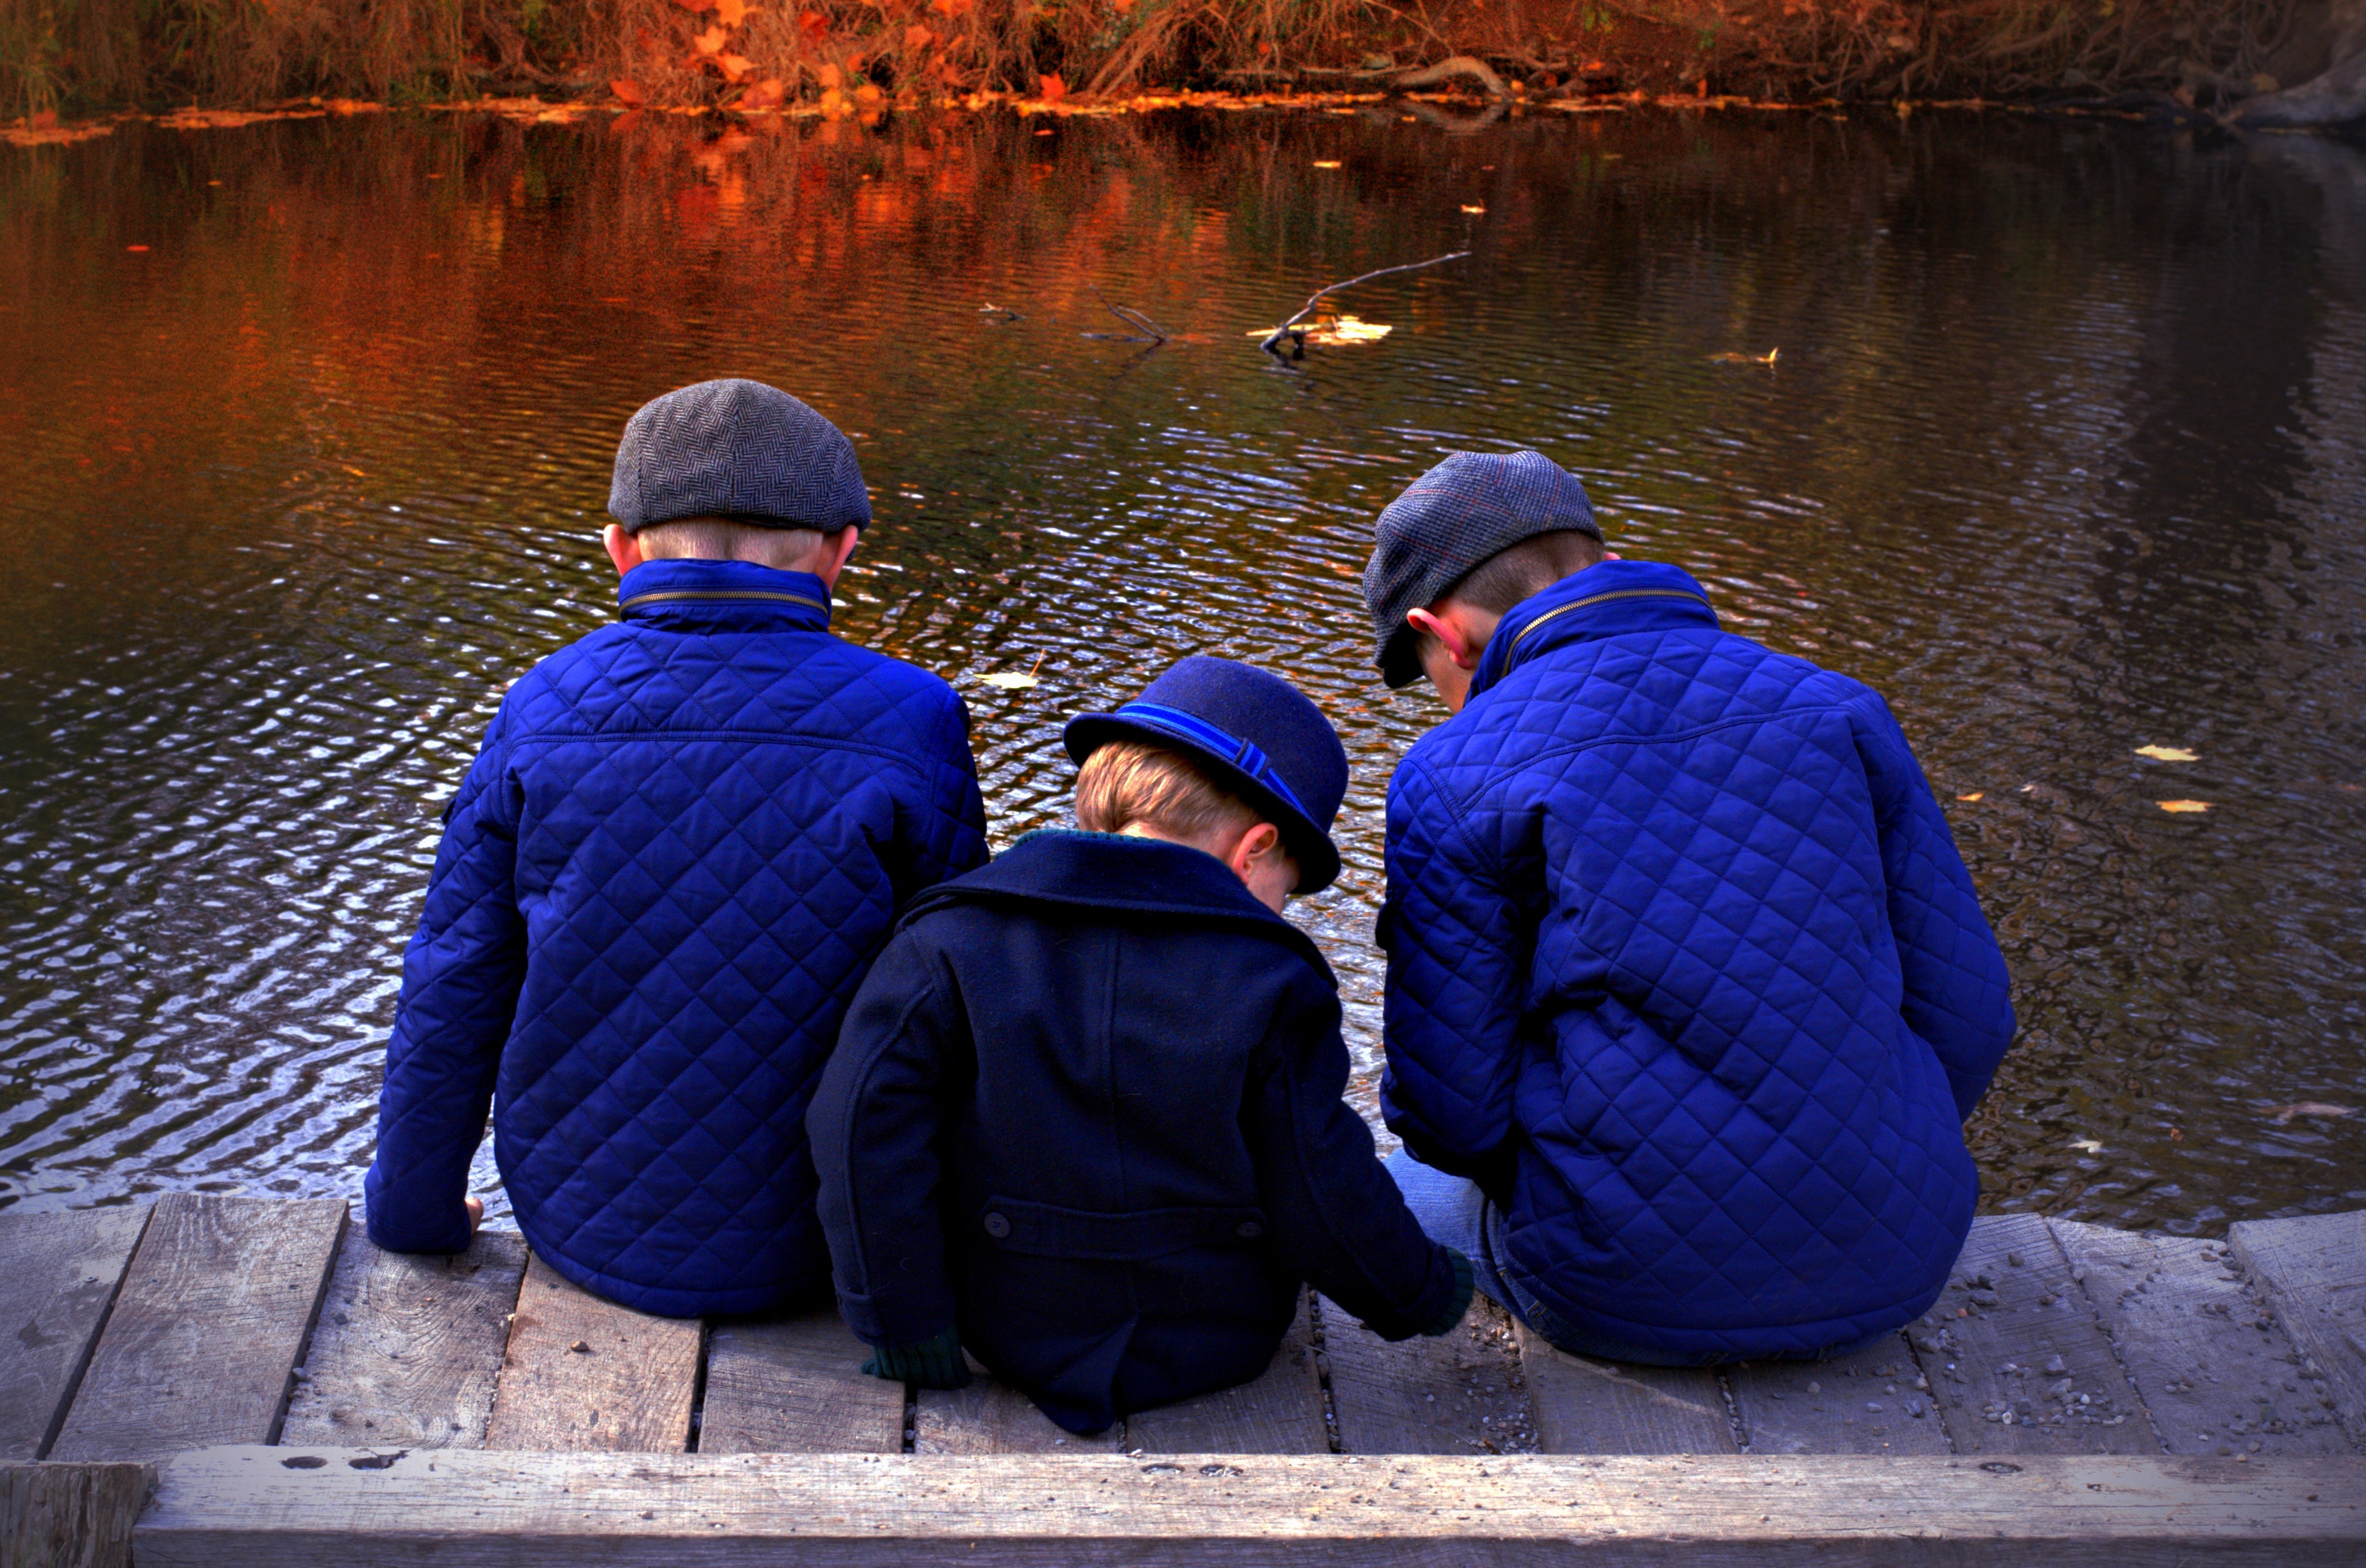 Autumn, Nature, River, Fall, Boys, Blue, togetherness, rear view